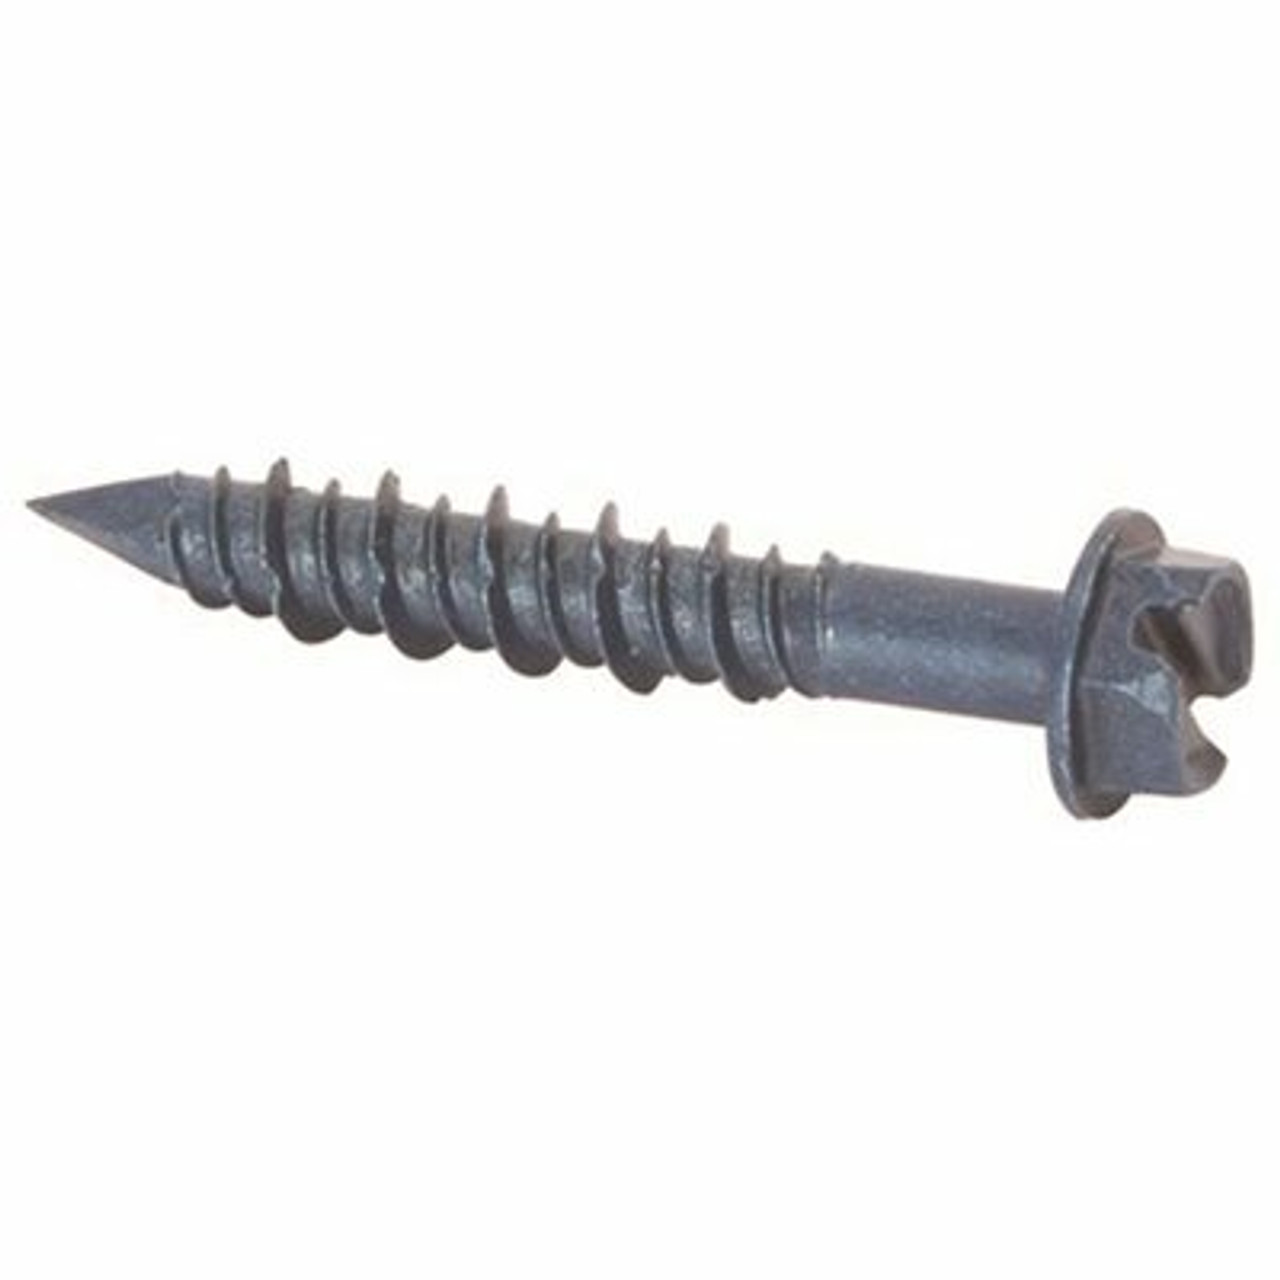 Lindstrom 1/4 In. X 2-3/4 In. Slotted Hex Head Masonry Fasteners (100 Per Pack)